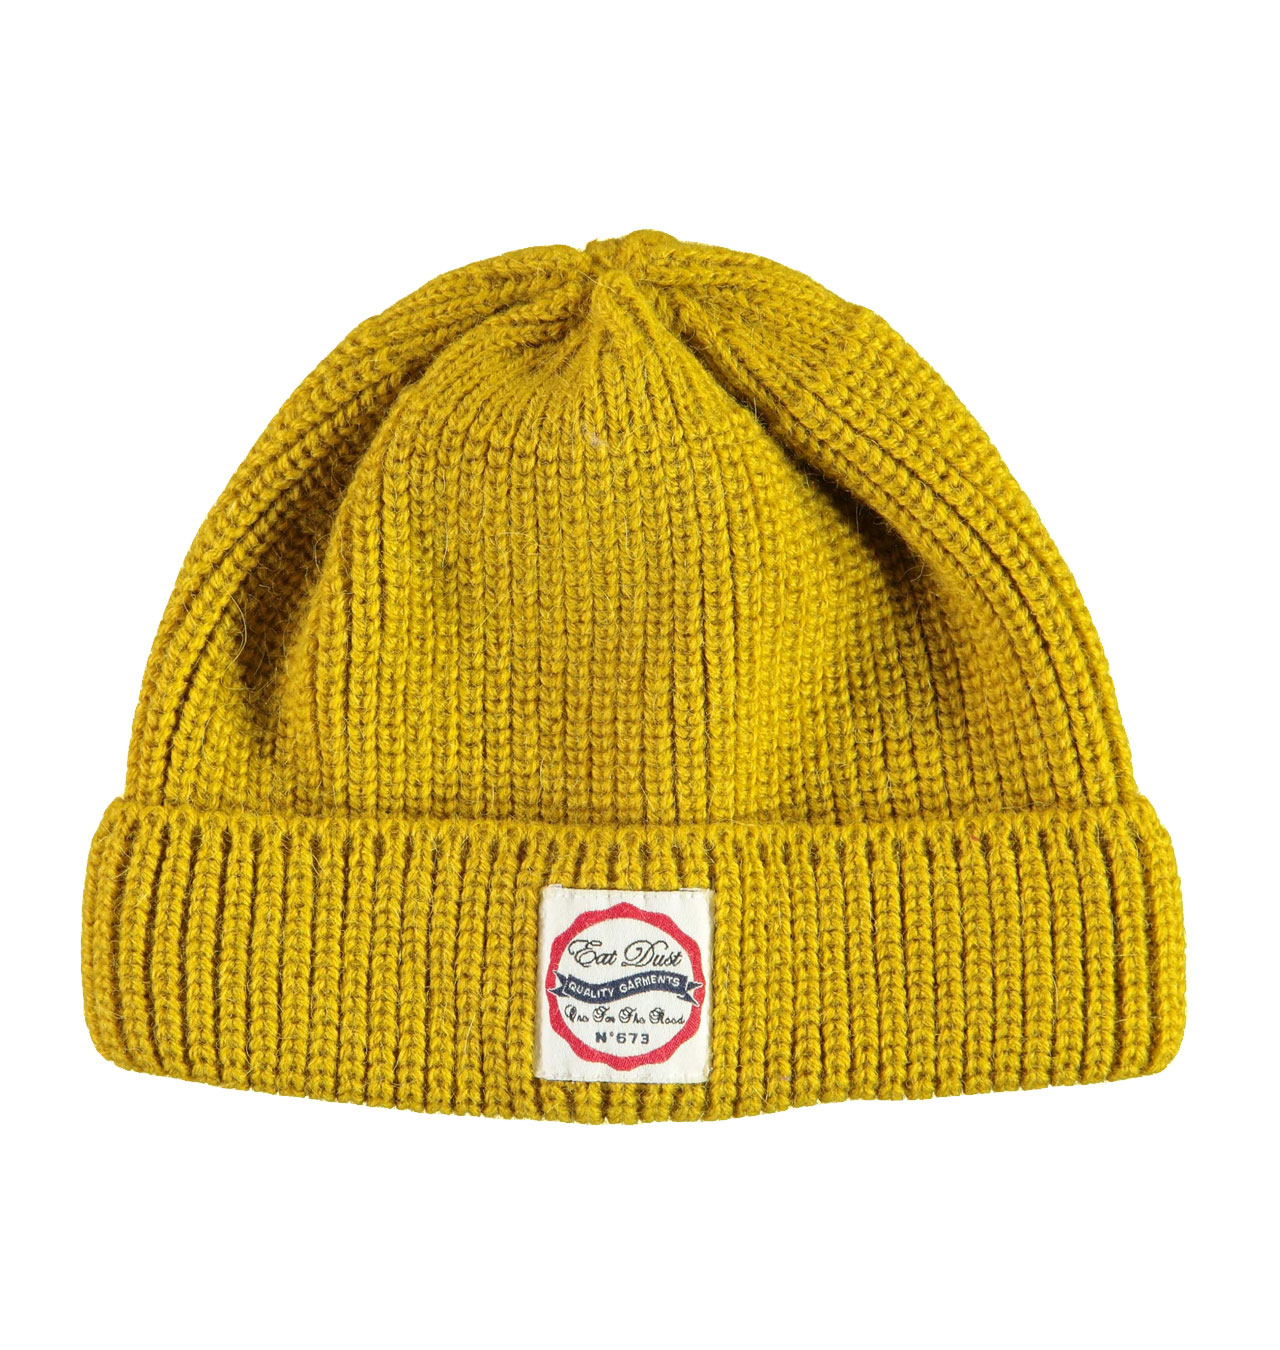 Eat Dust - Sailor Beanie Knitted Wool - Yellow